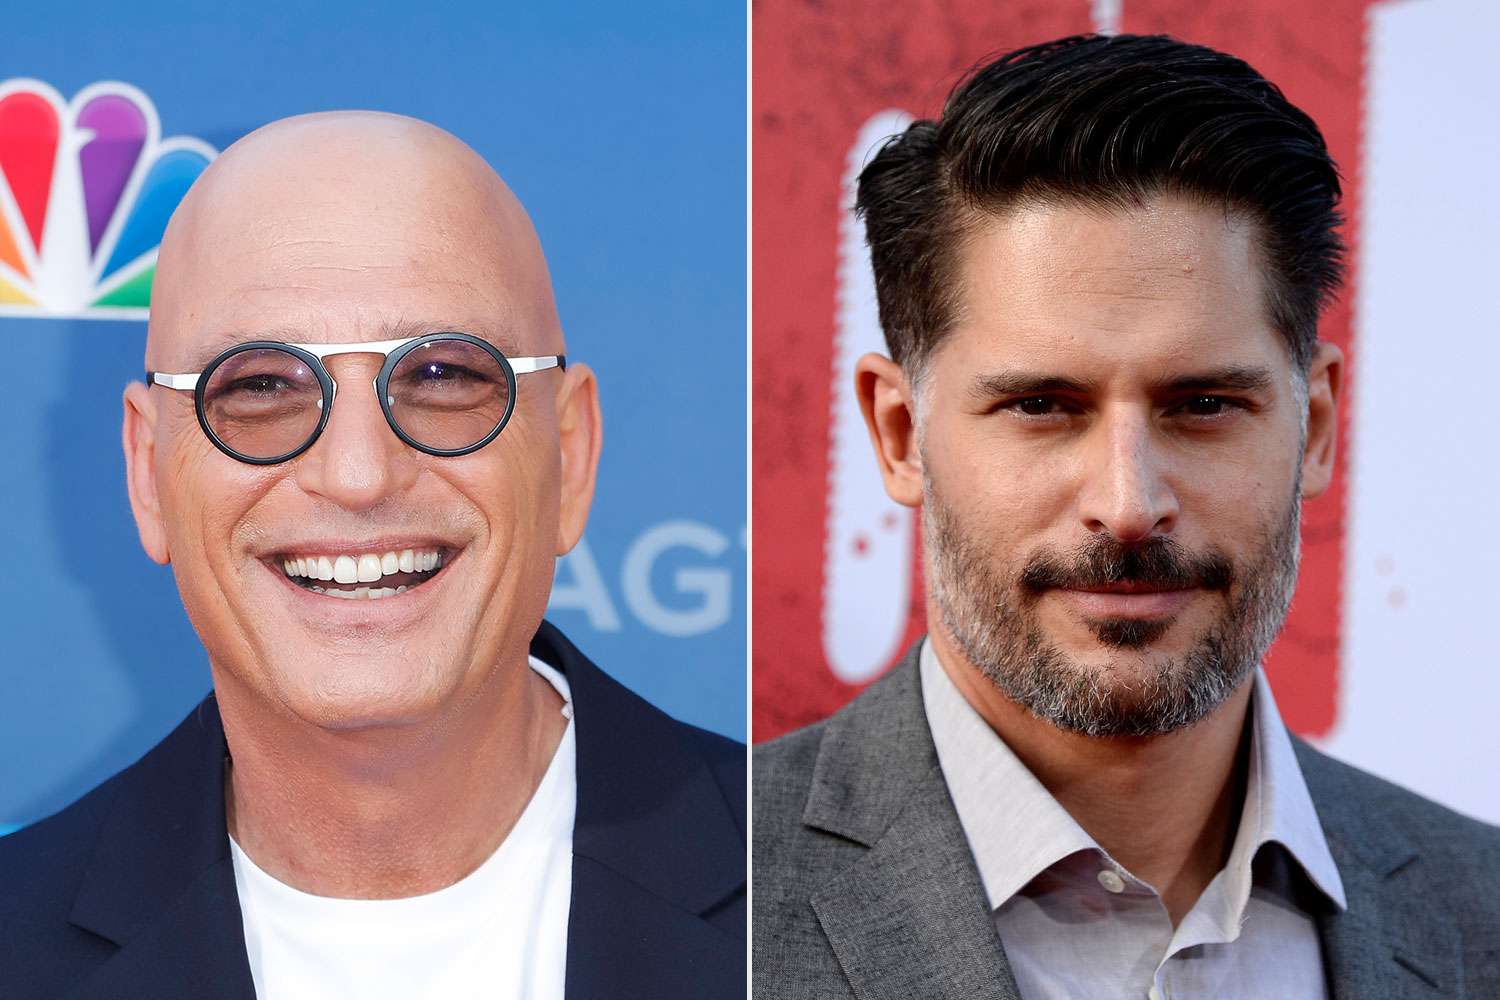 Howie Mandel Praises 'Amazing' Joe Manganiello on “Deal or No Deal Island”: 'He's Almost as Handsome as Me' (Exclusive)